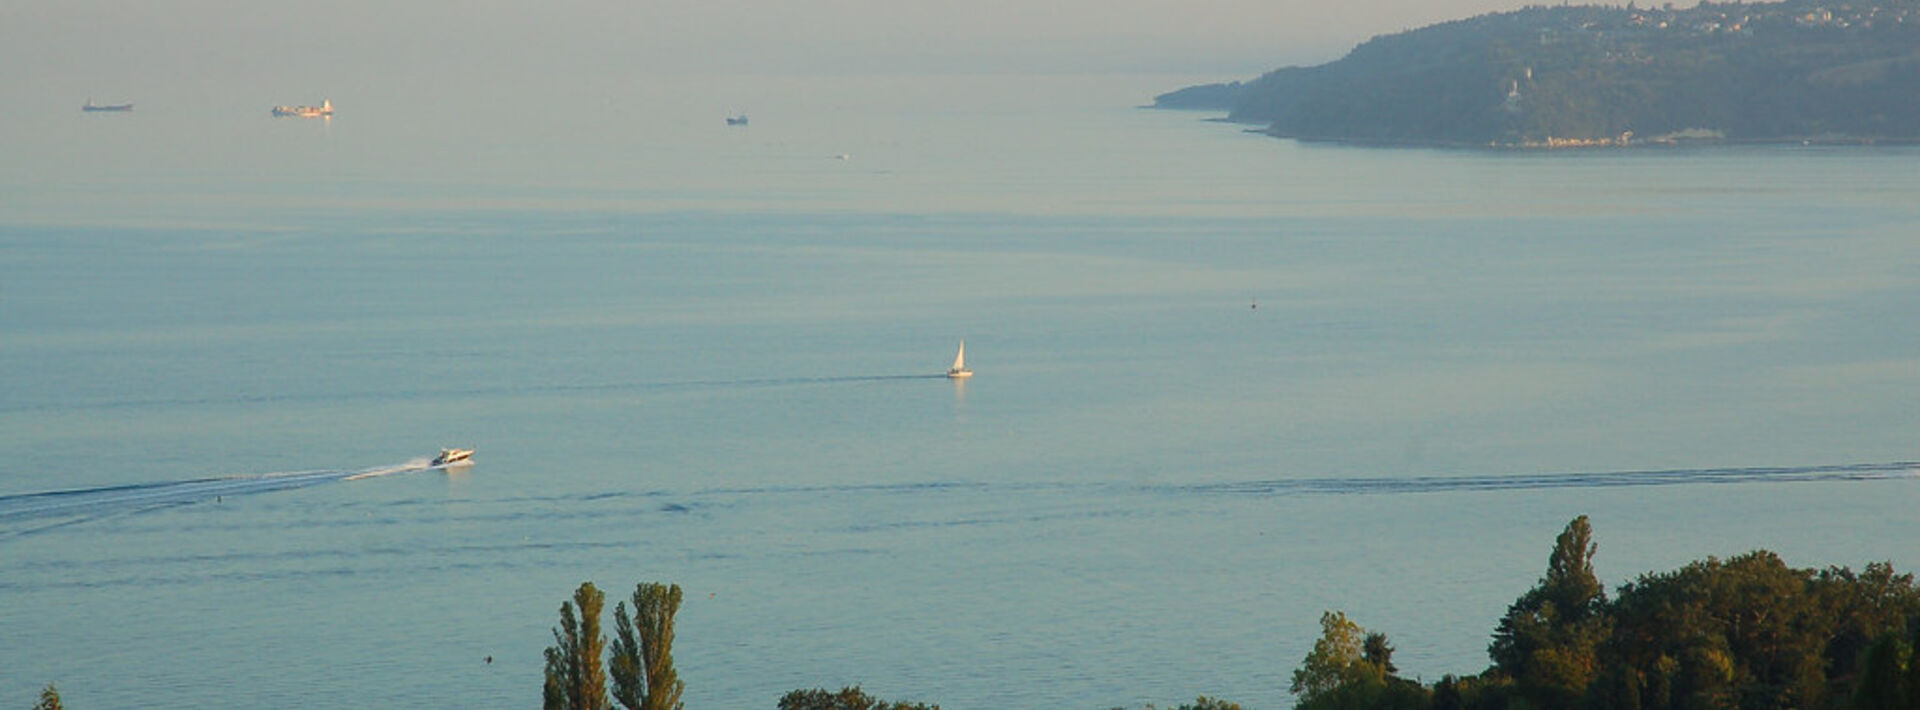 Varna Bay, viewed from the township